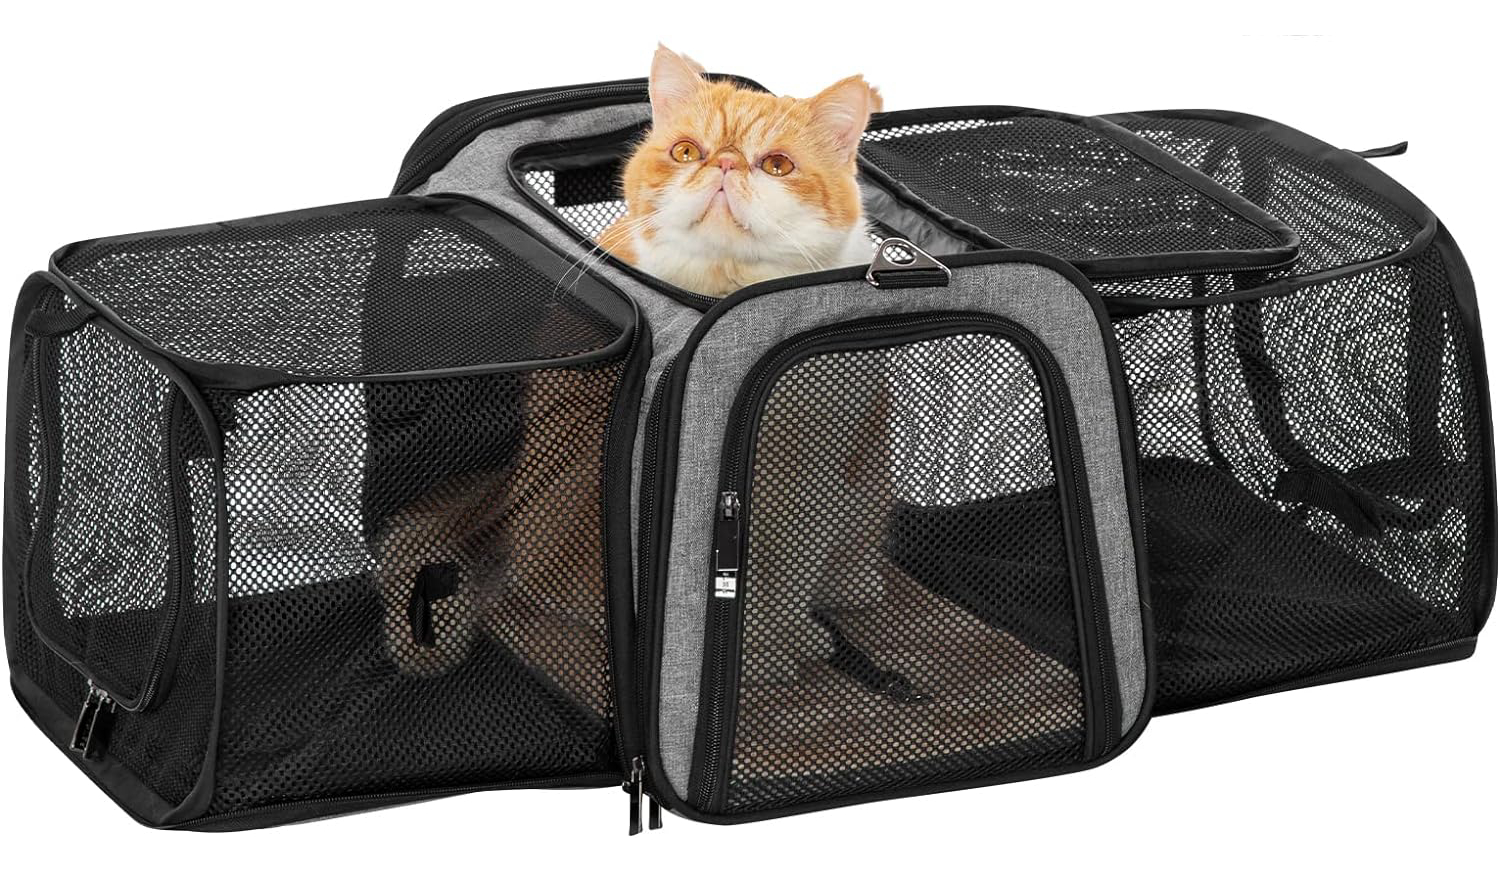 Petsfit 17_ x 11_ x 11_ Expandable Pet Carrier Airline Approved for Travel, Maximum Pet Weight 15 Pounds